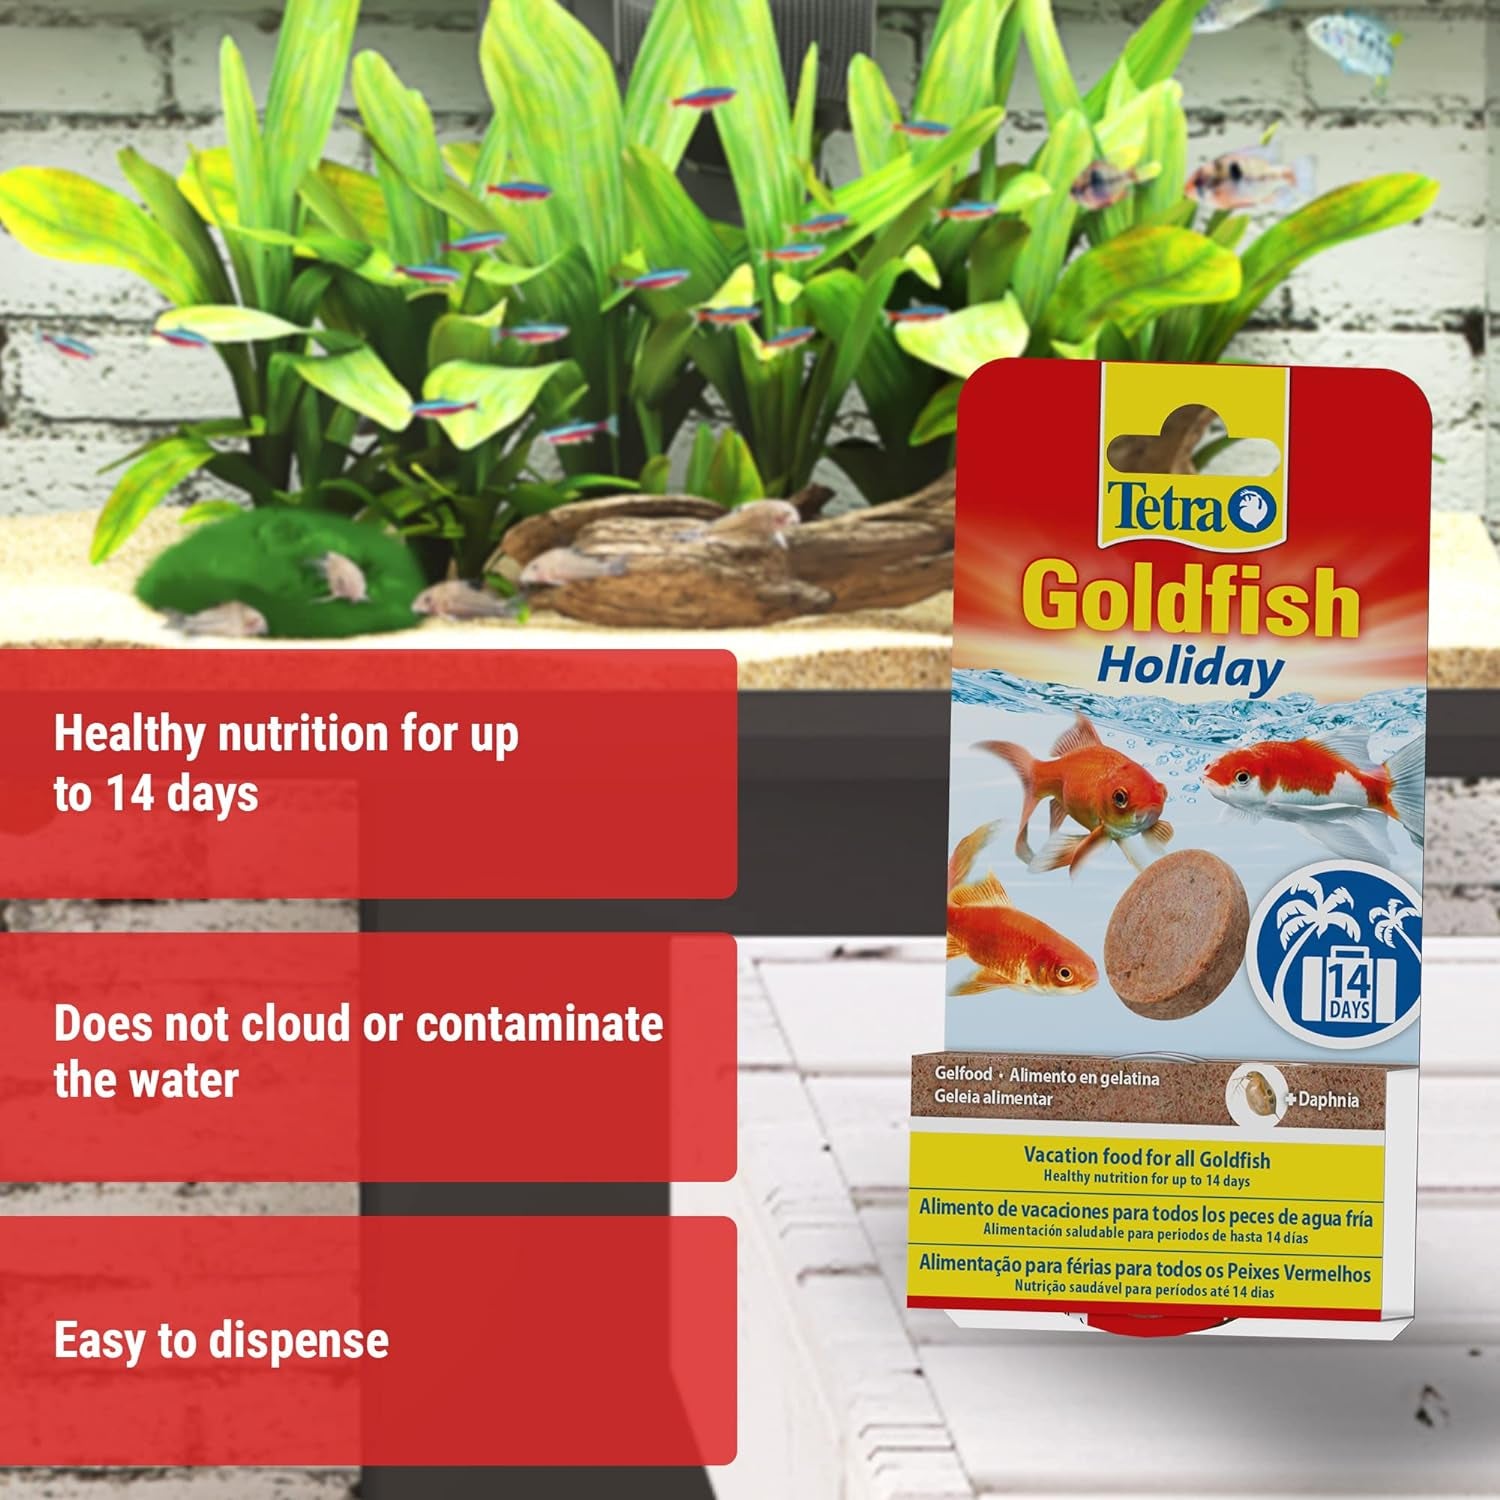 Goldfish Holiday - Holiday Food for All Goldfish, Healthy Nutrition for up to 14 Days, 2 X 12 G Gel Food Block